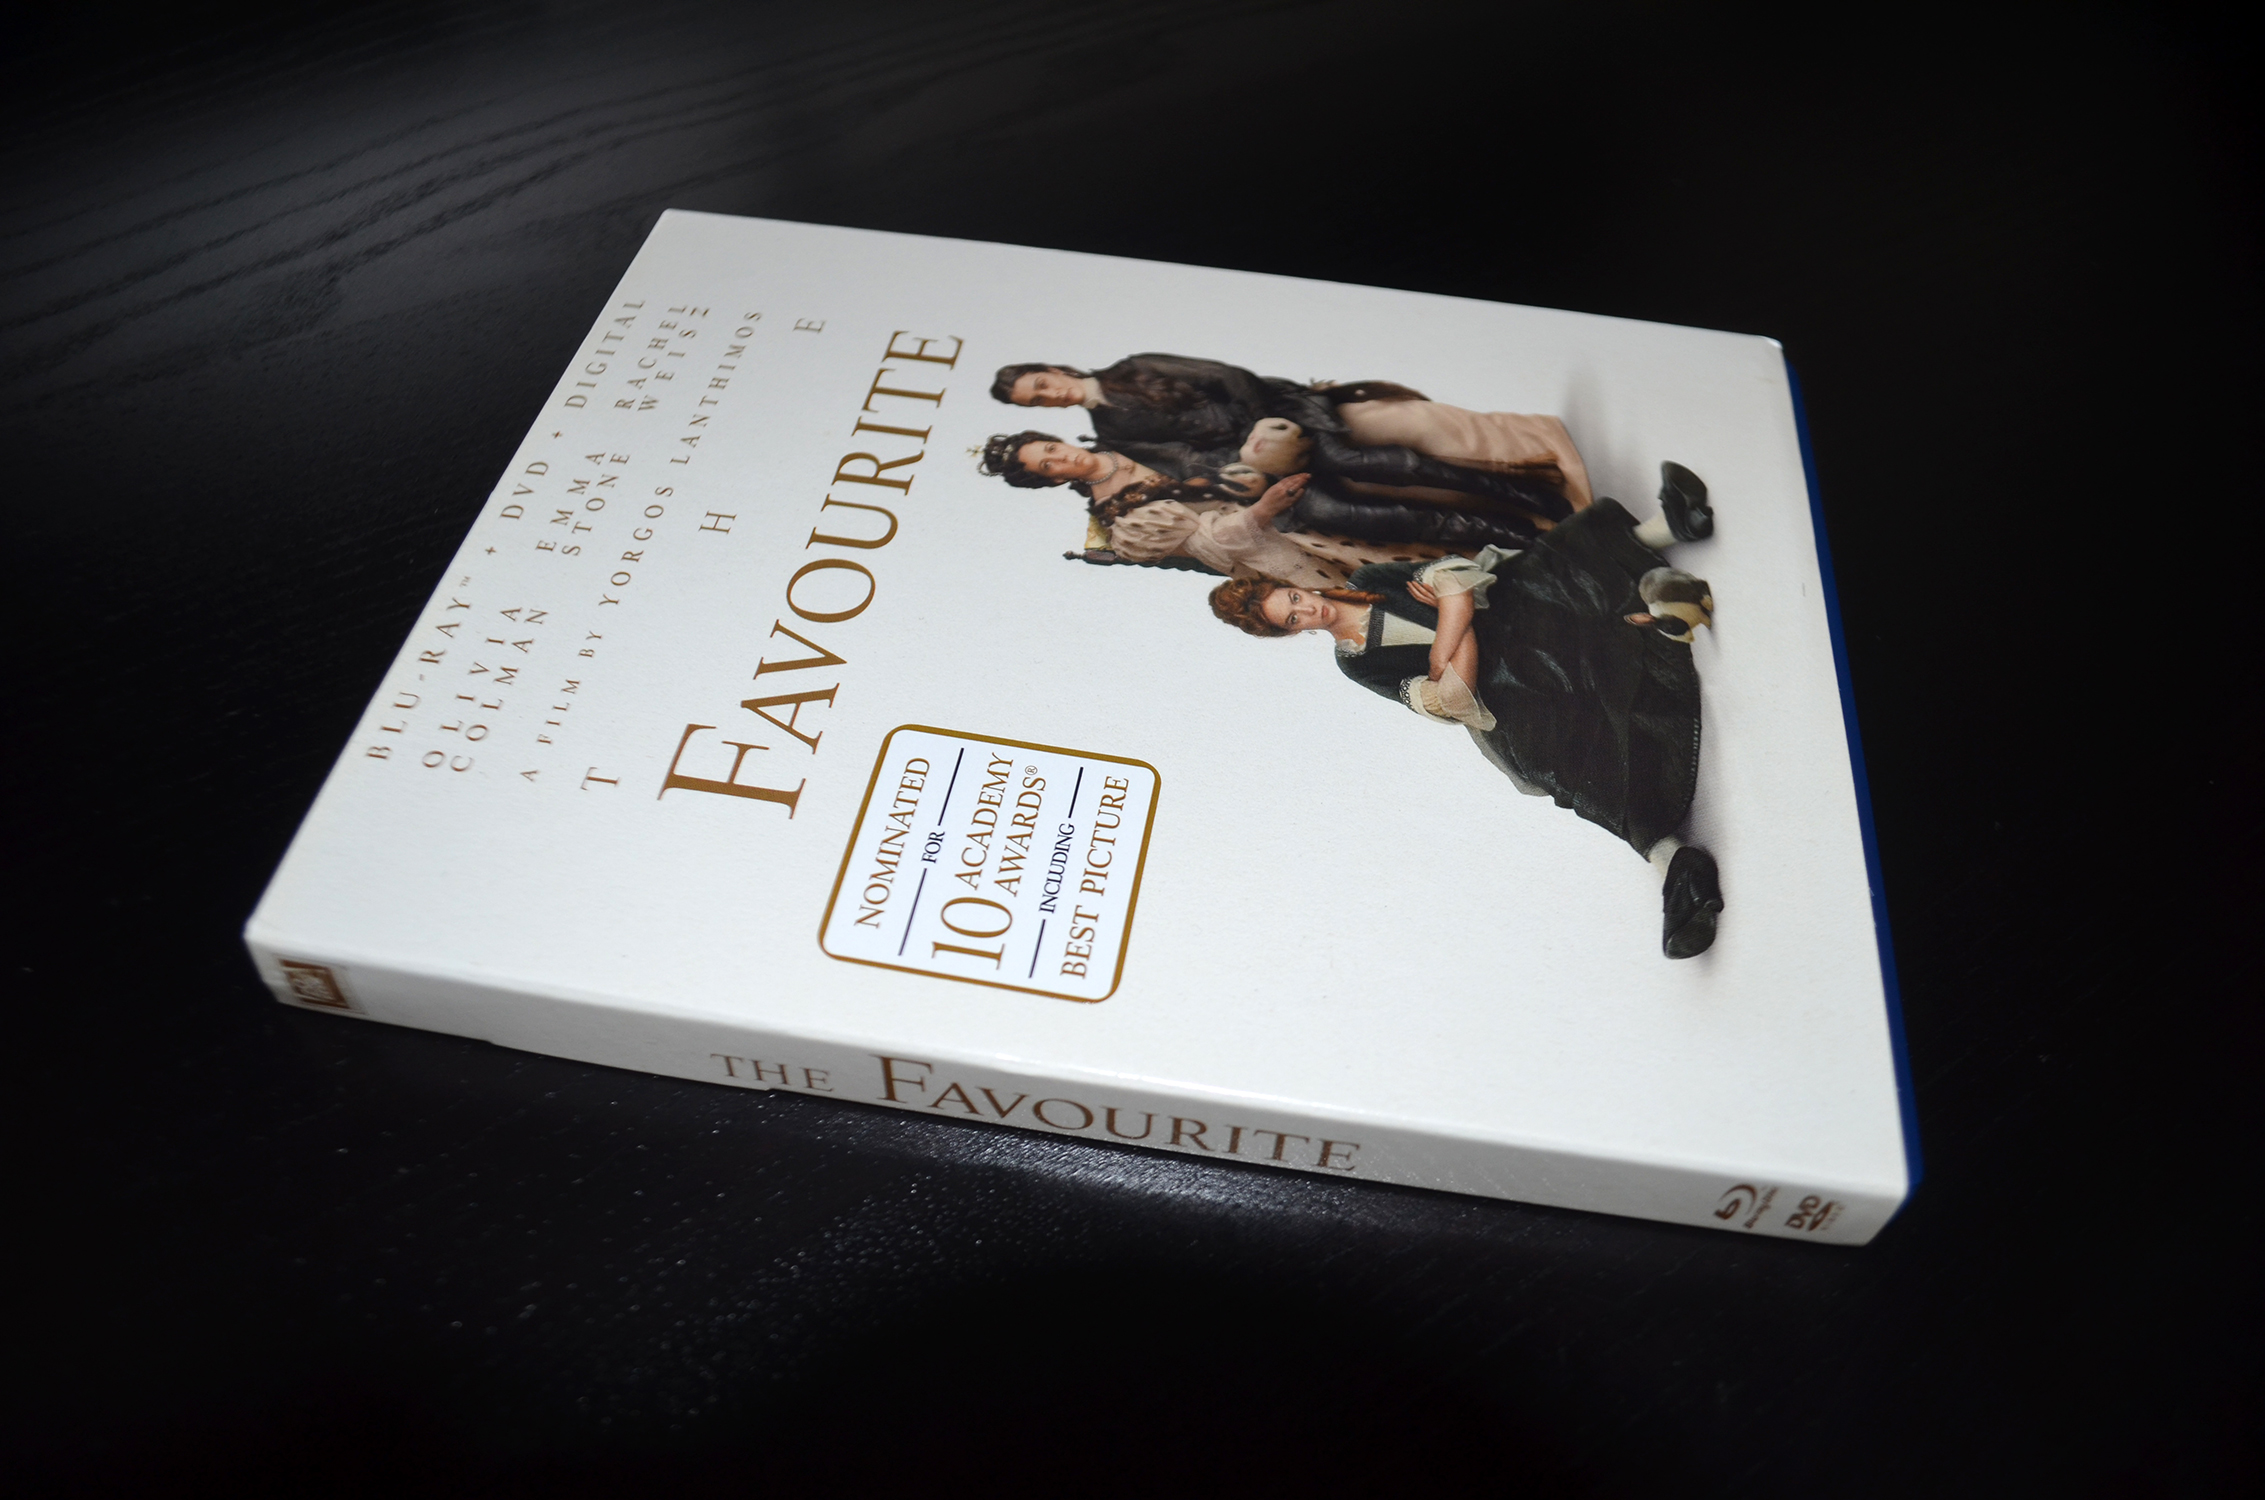 Review: The Favourite (Blu-ray) - The Based Update